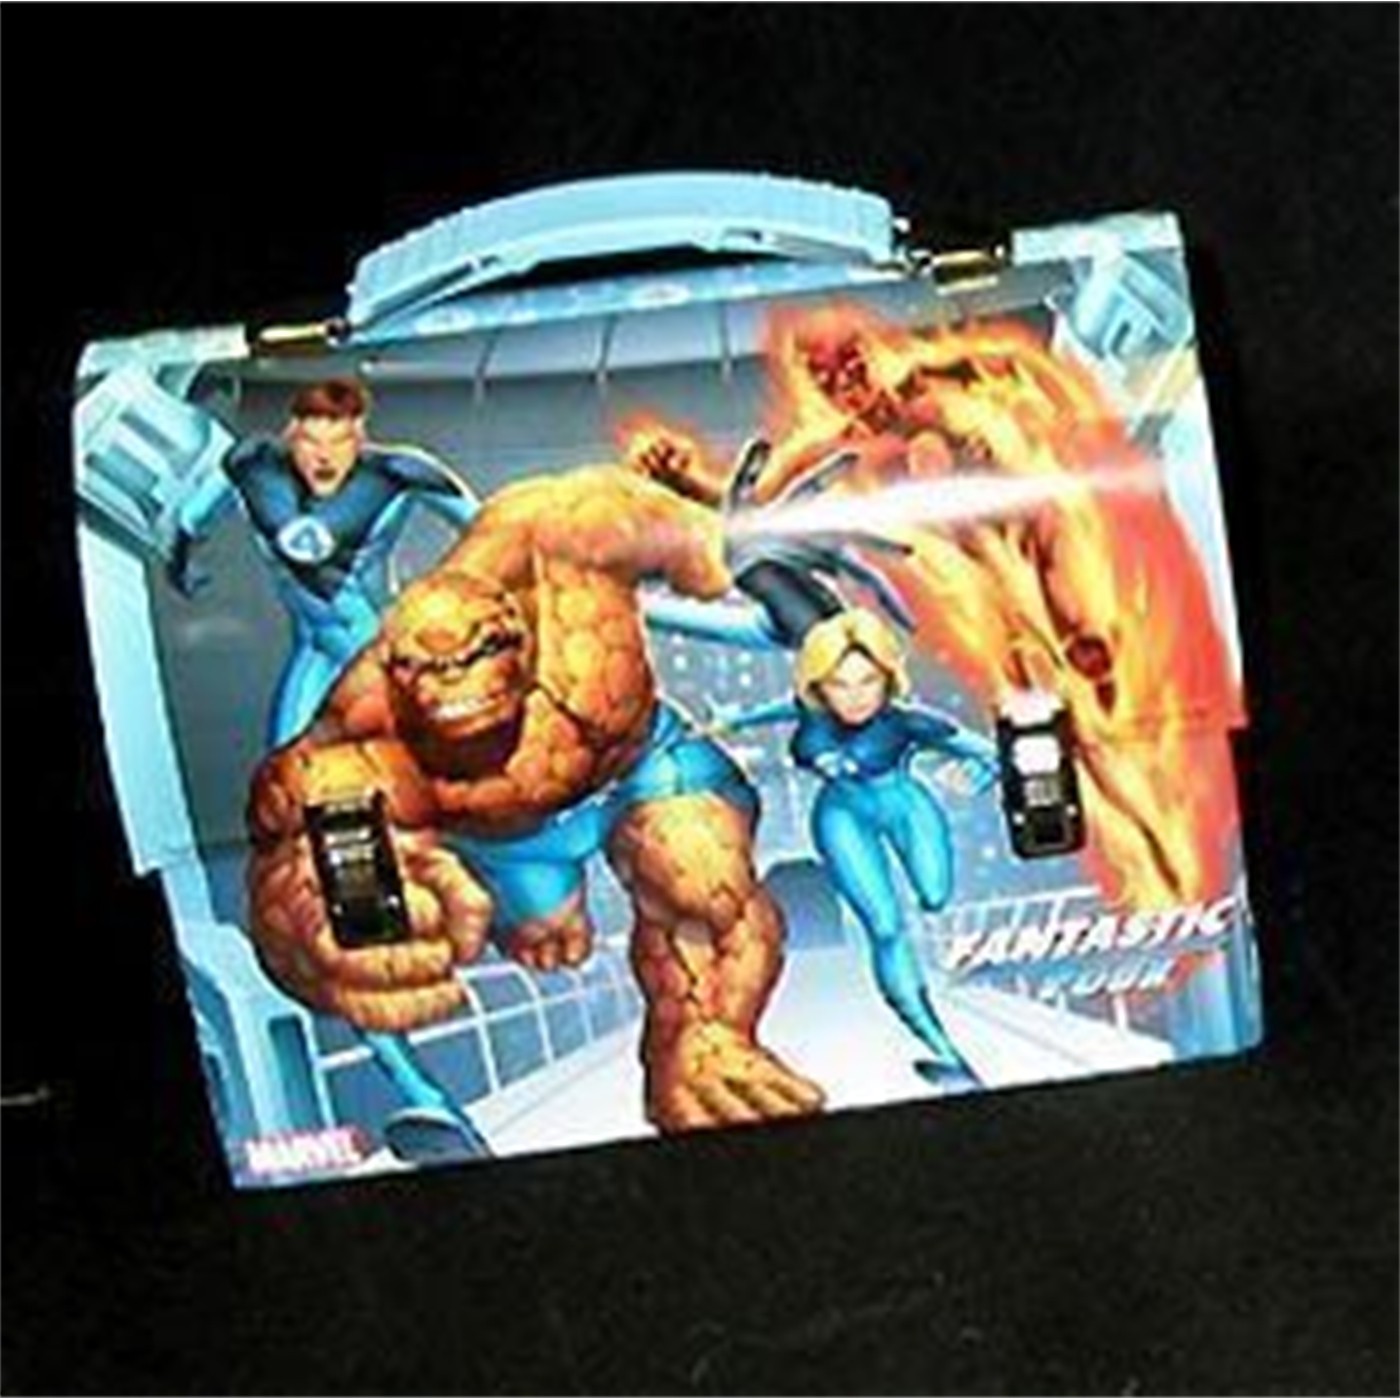 Fantastic Four Lunchbox: Charge